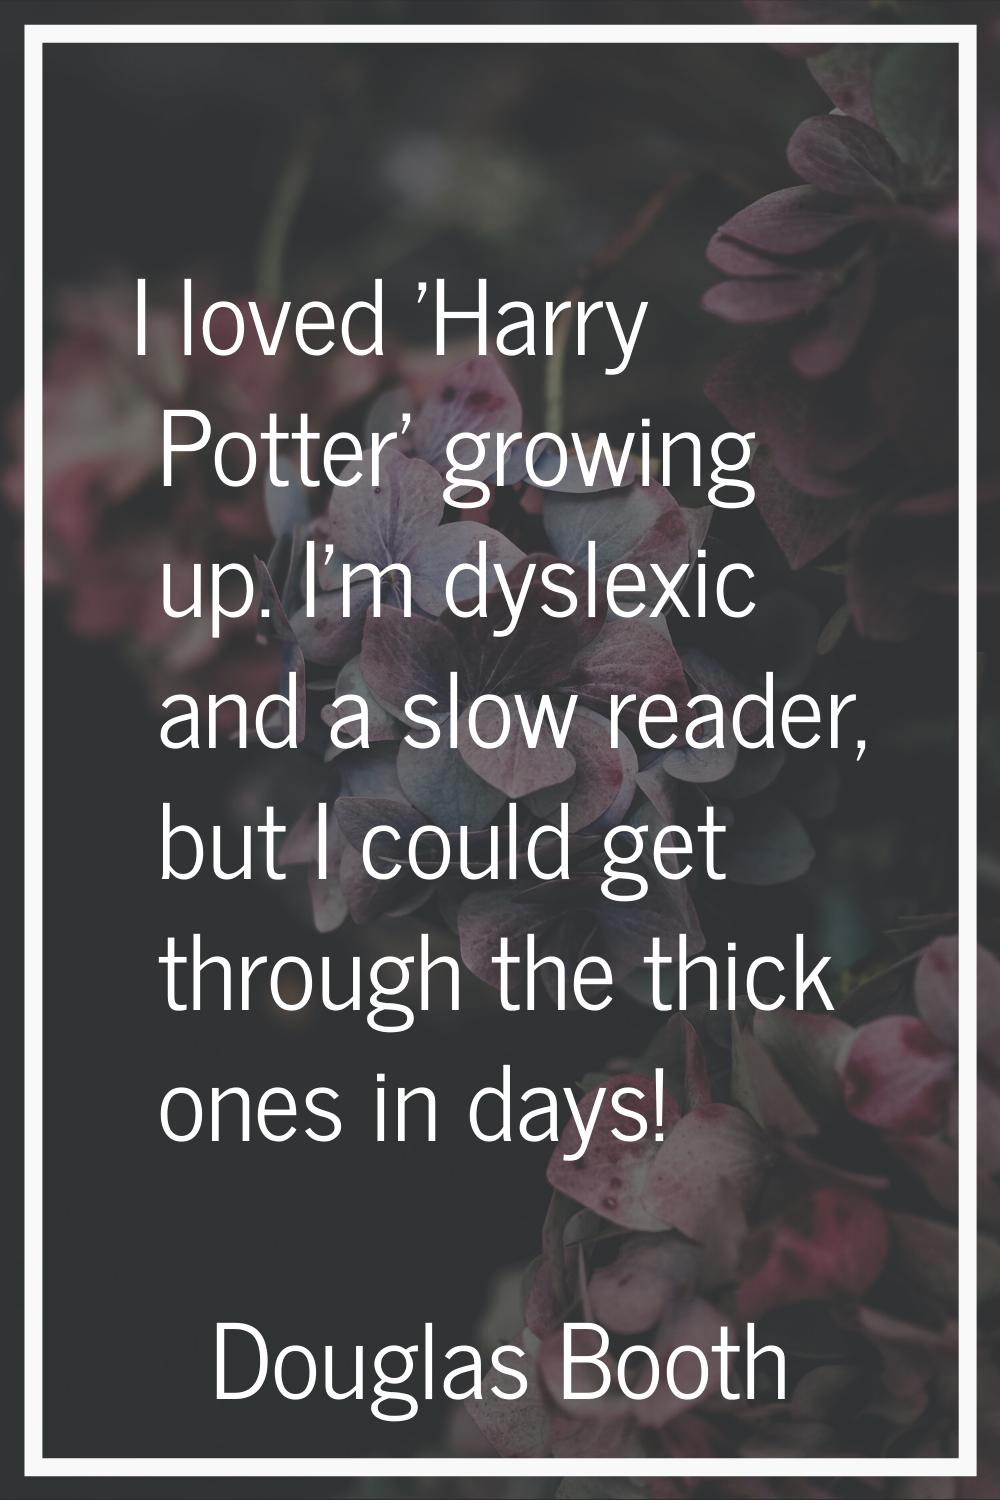 I loved 'Harry Potter' growing up. I'm dyslexic and a slow reader, but I could get through the thic